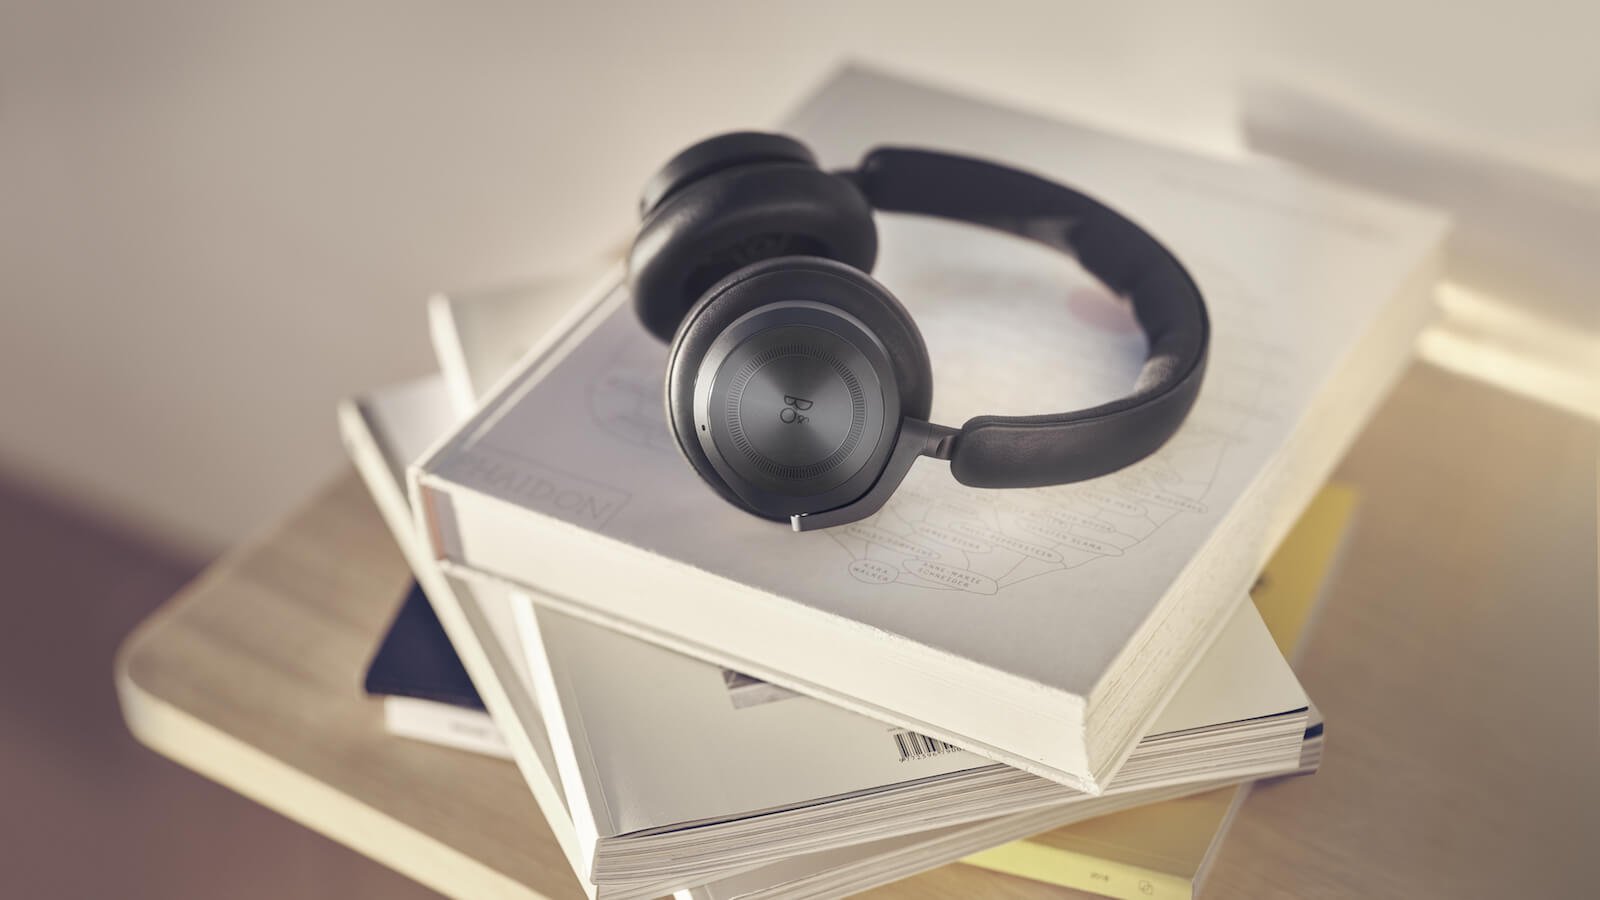 Bang & Olufsen Beoplay HX ANC headphones offer a 40-hour battery life & 40 mm drivers